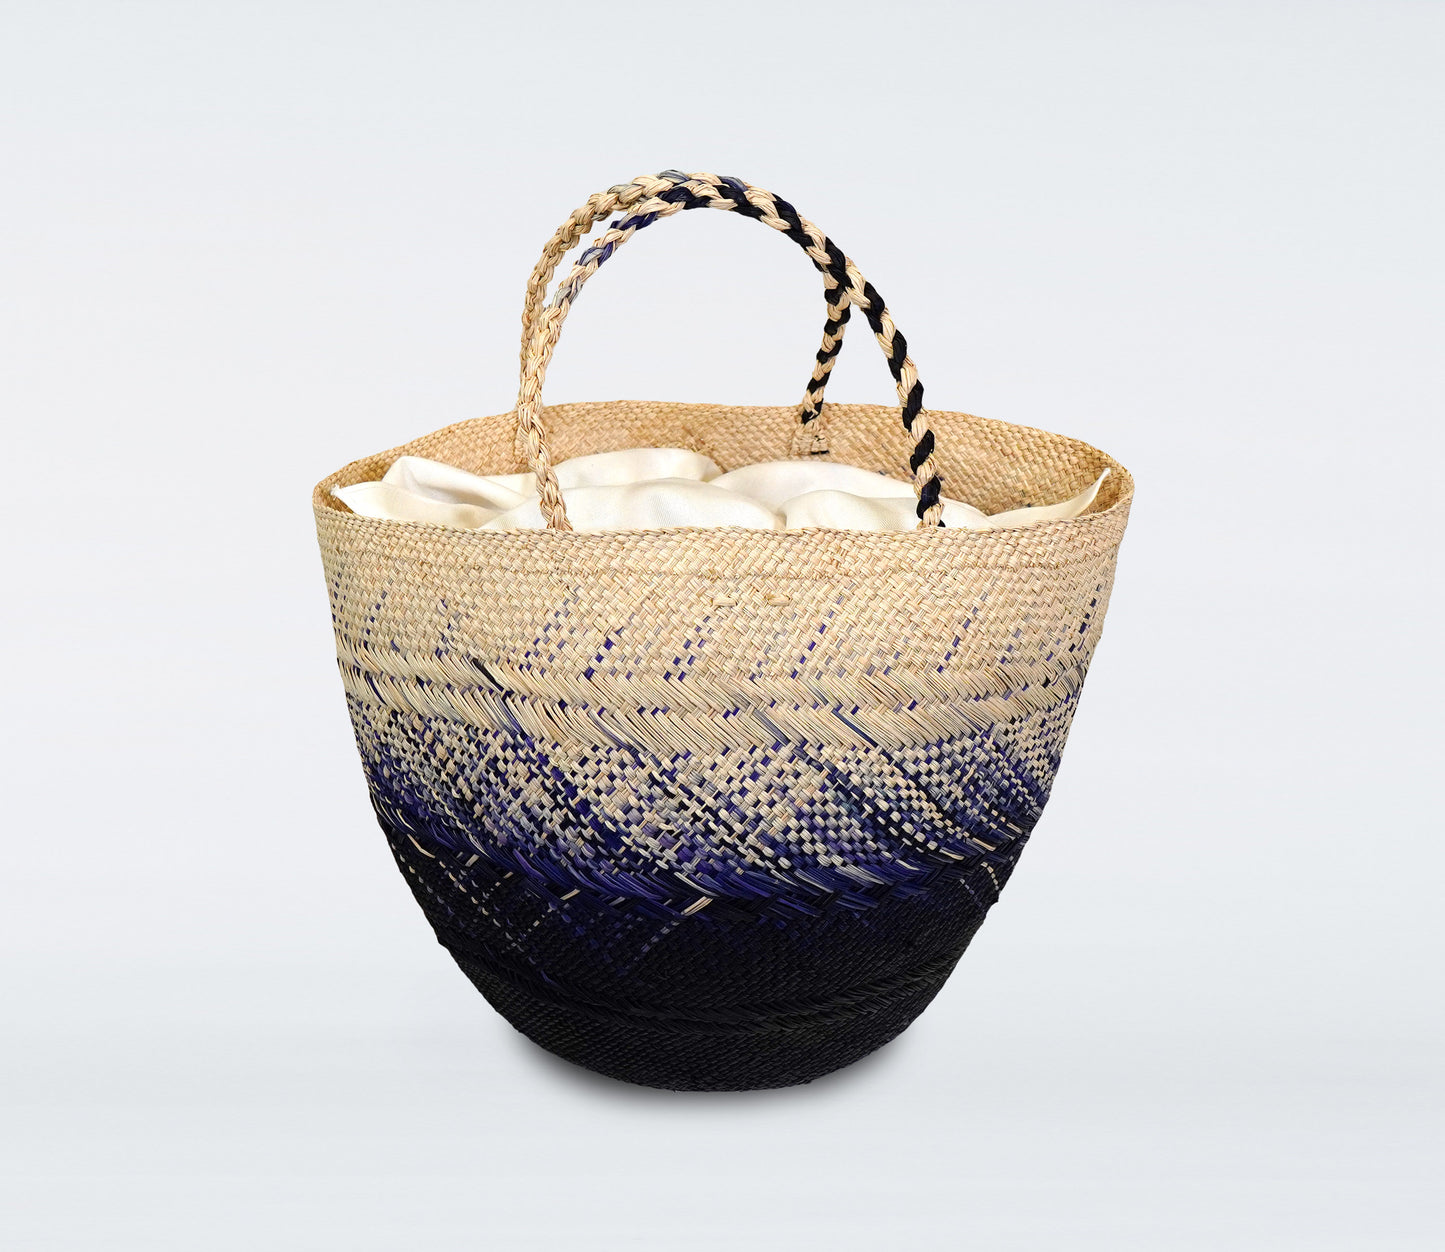 Medium purple basket in straw, cotton bag and natural shell.